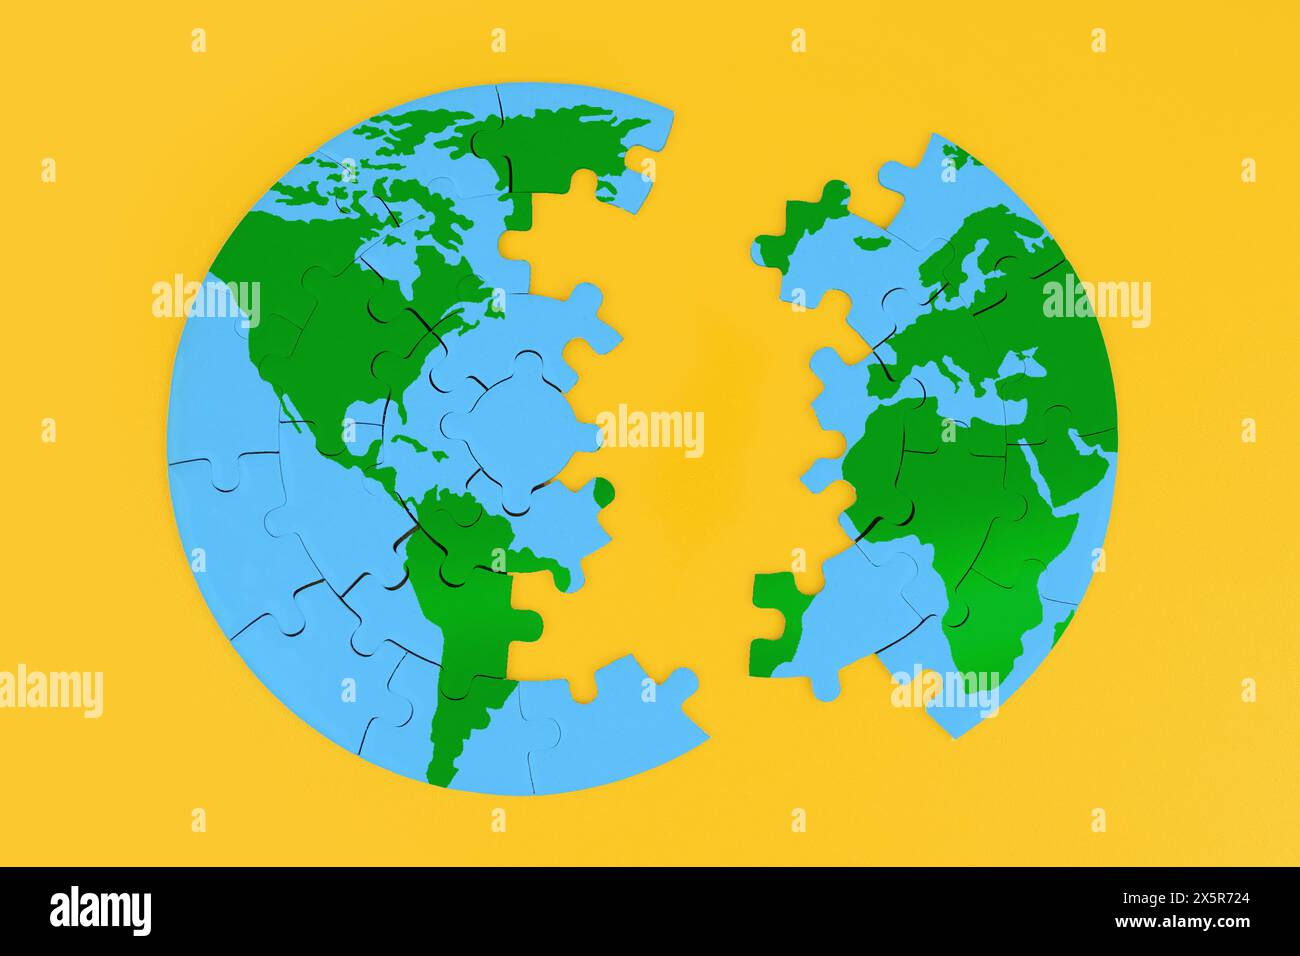 Jigsaw globe puzzle with green continents and blue oceans split into two parts against a bold yellow backdrop. Unity, division and global interconnect Stock Photo